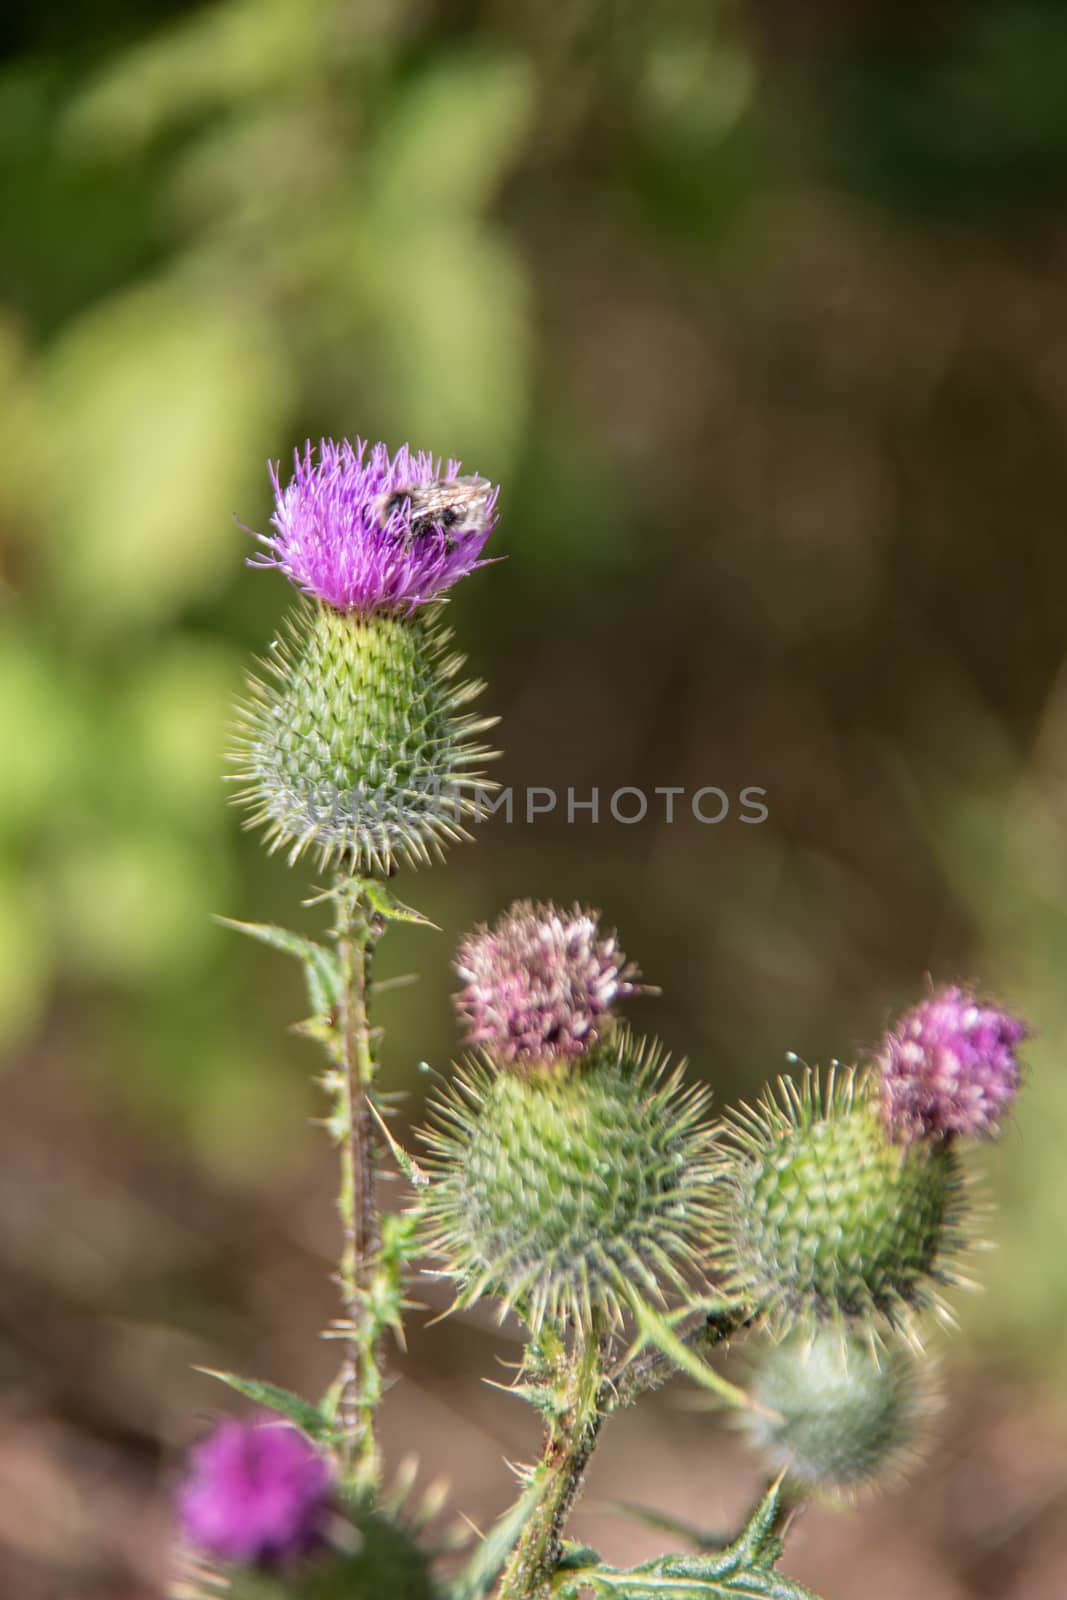 Thistles with purple flowers